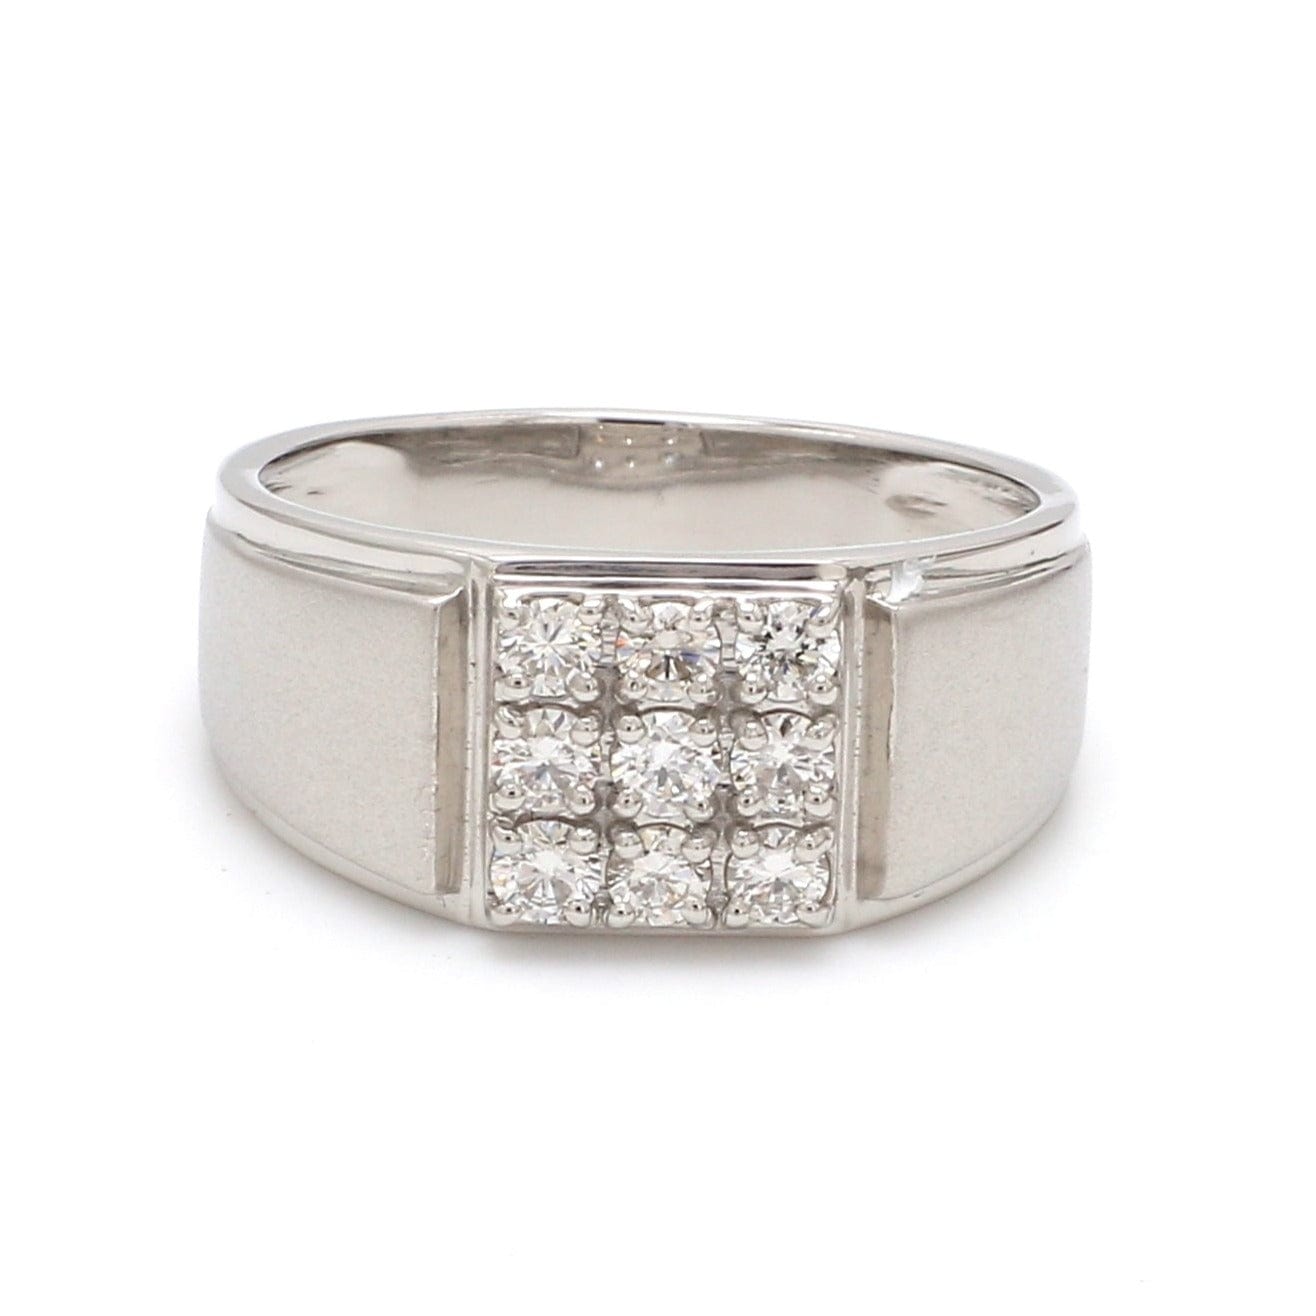 Men's Diamond Accent Rectangle Nugget Ring in White Gold